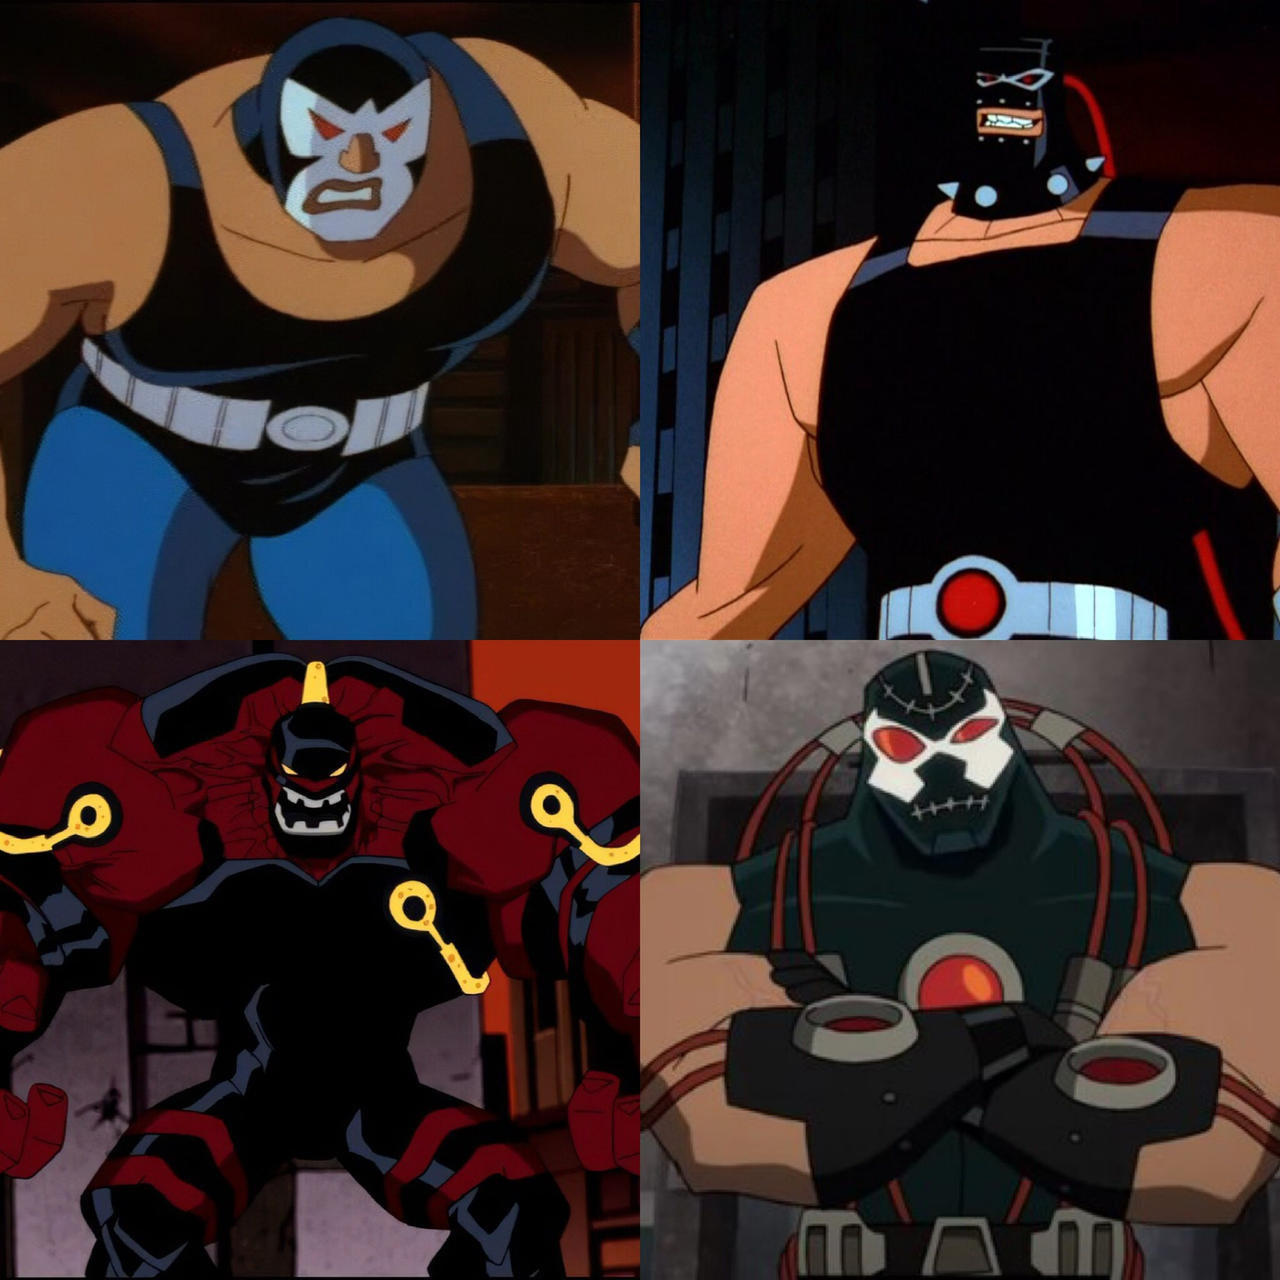 Animated Versions of Bane by TheJokerClown on DeviantArt